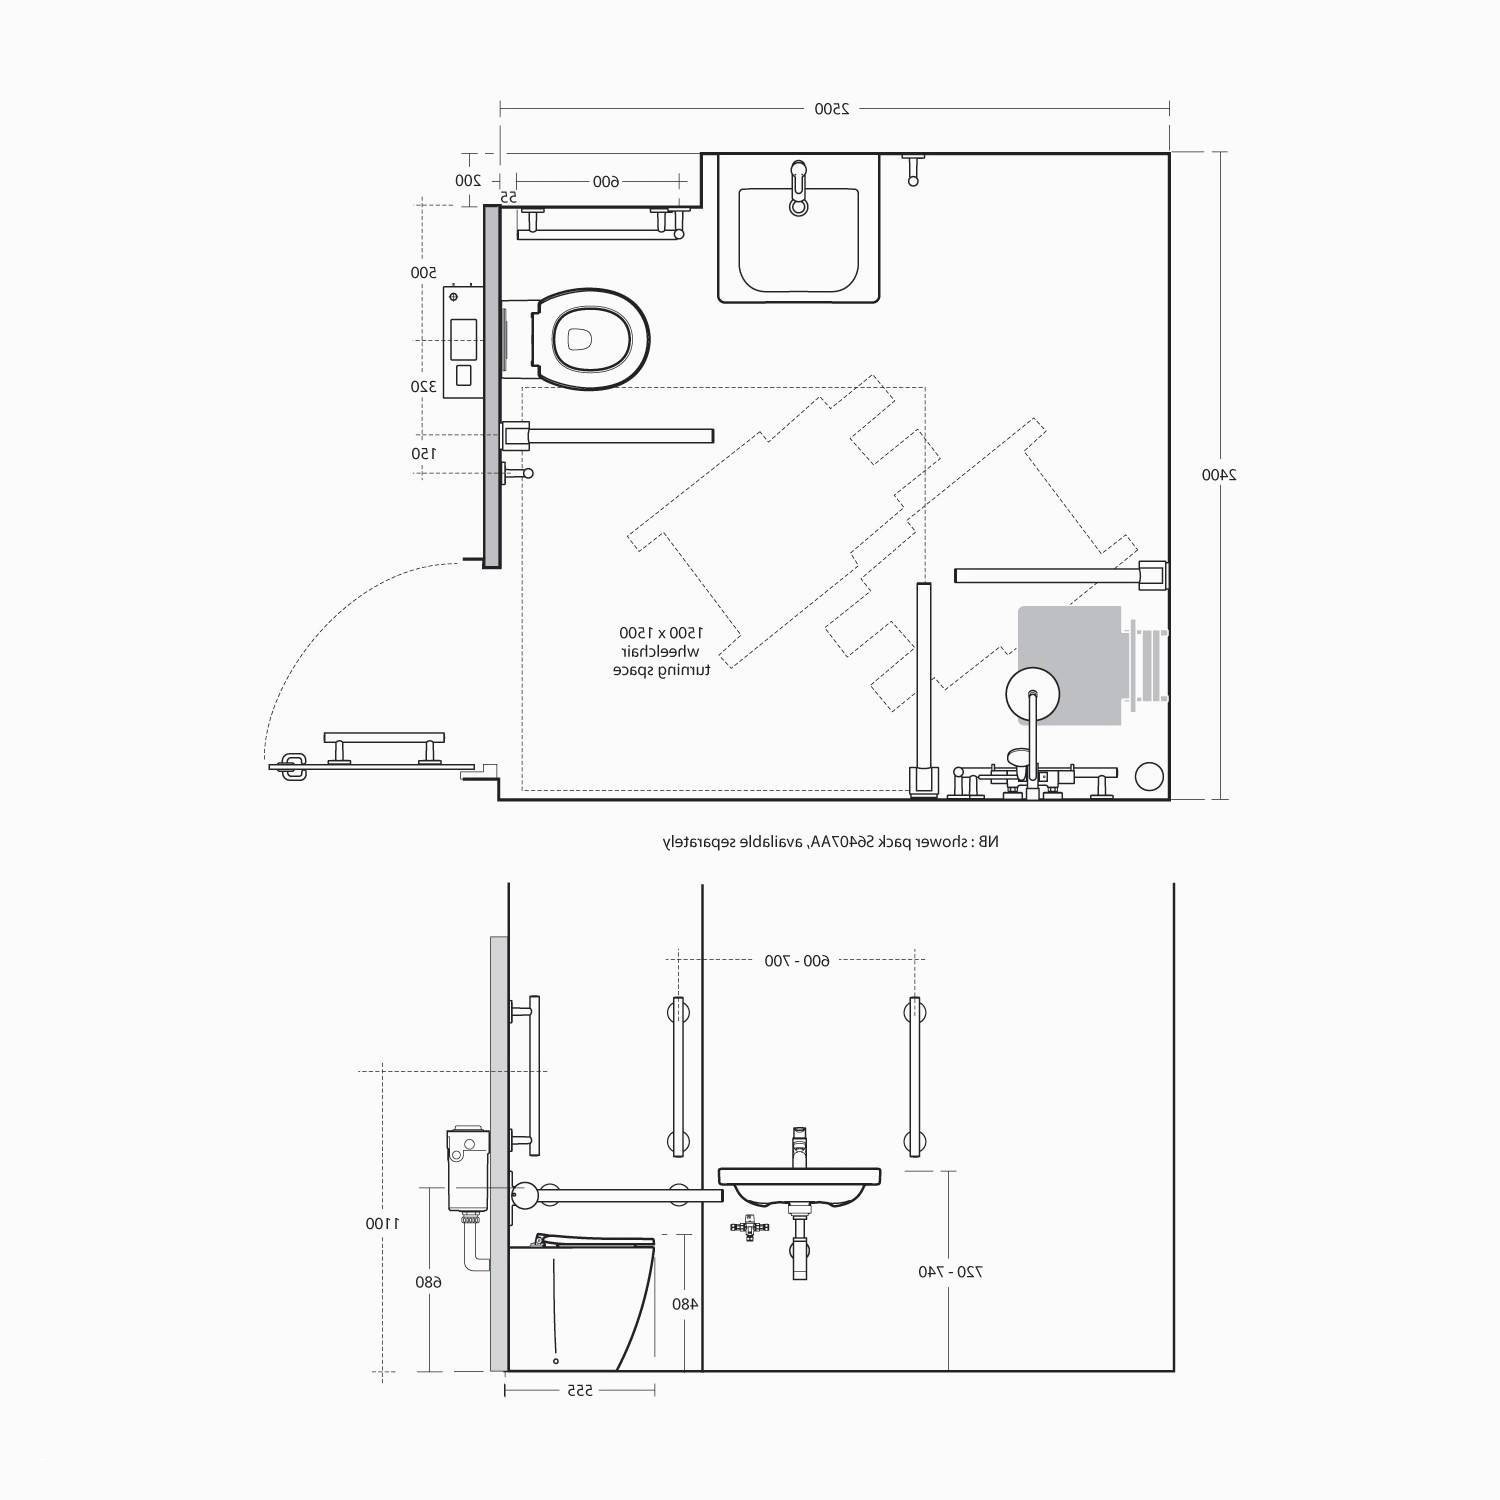 Home theater Diagram Collection Example Home Network Diagram Inspirational Layout Home Plans Draw Your Floor